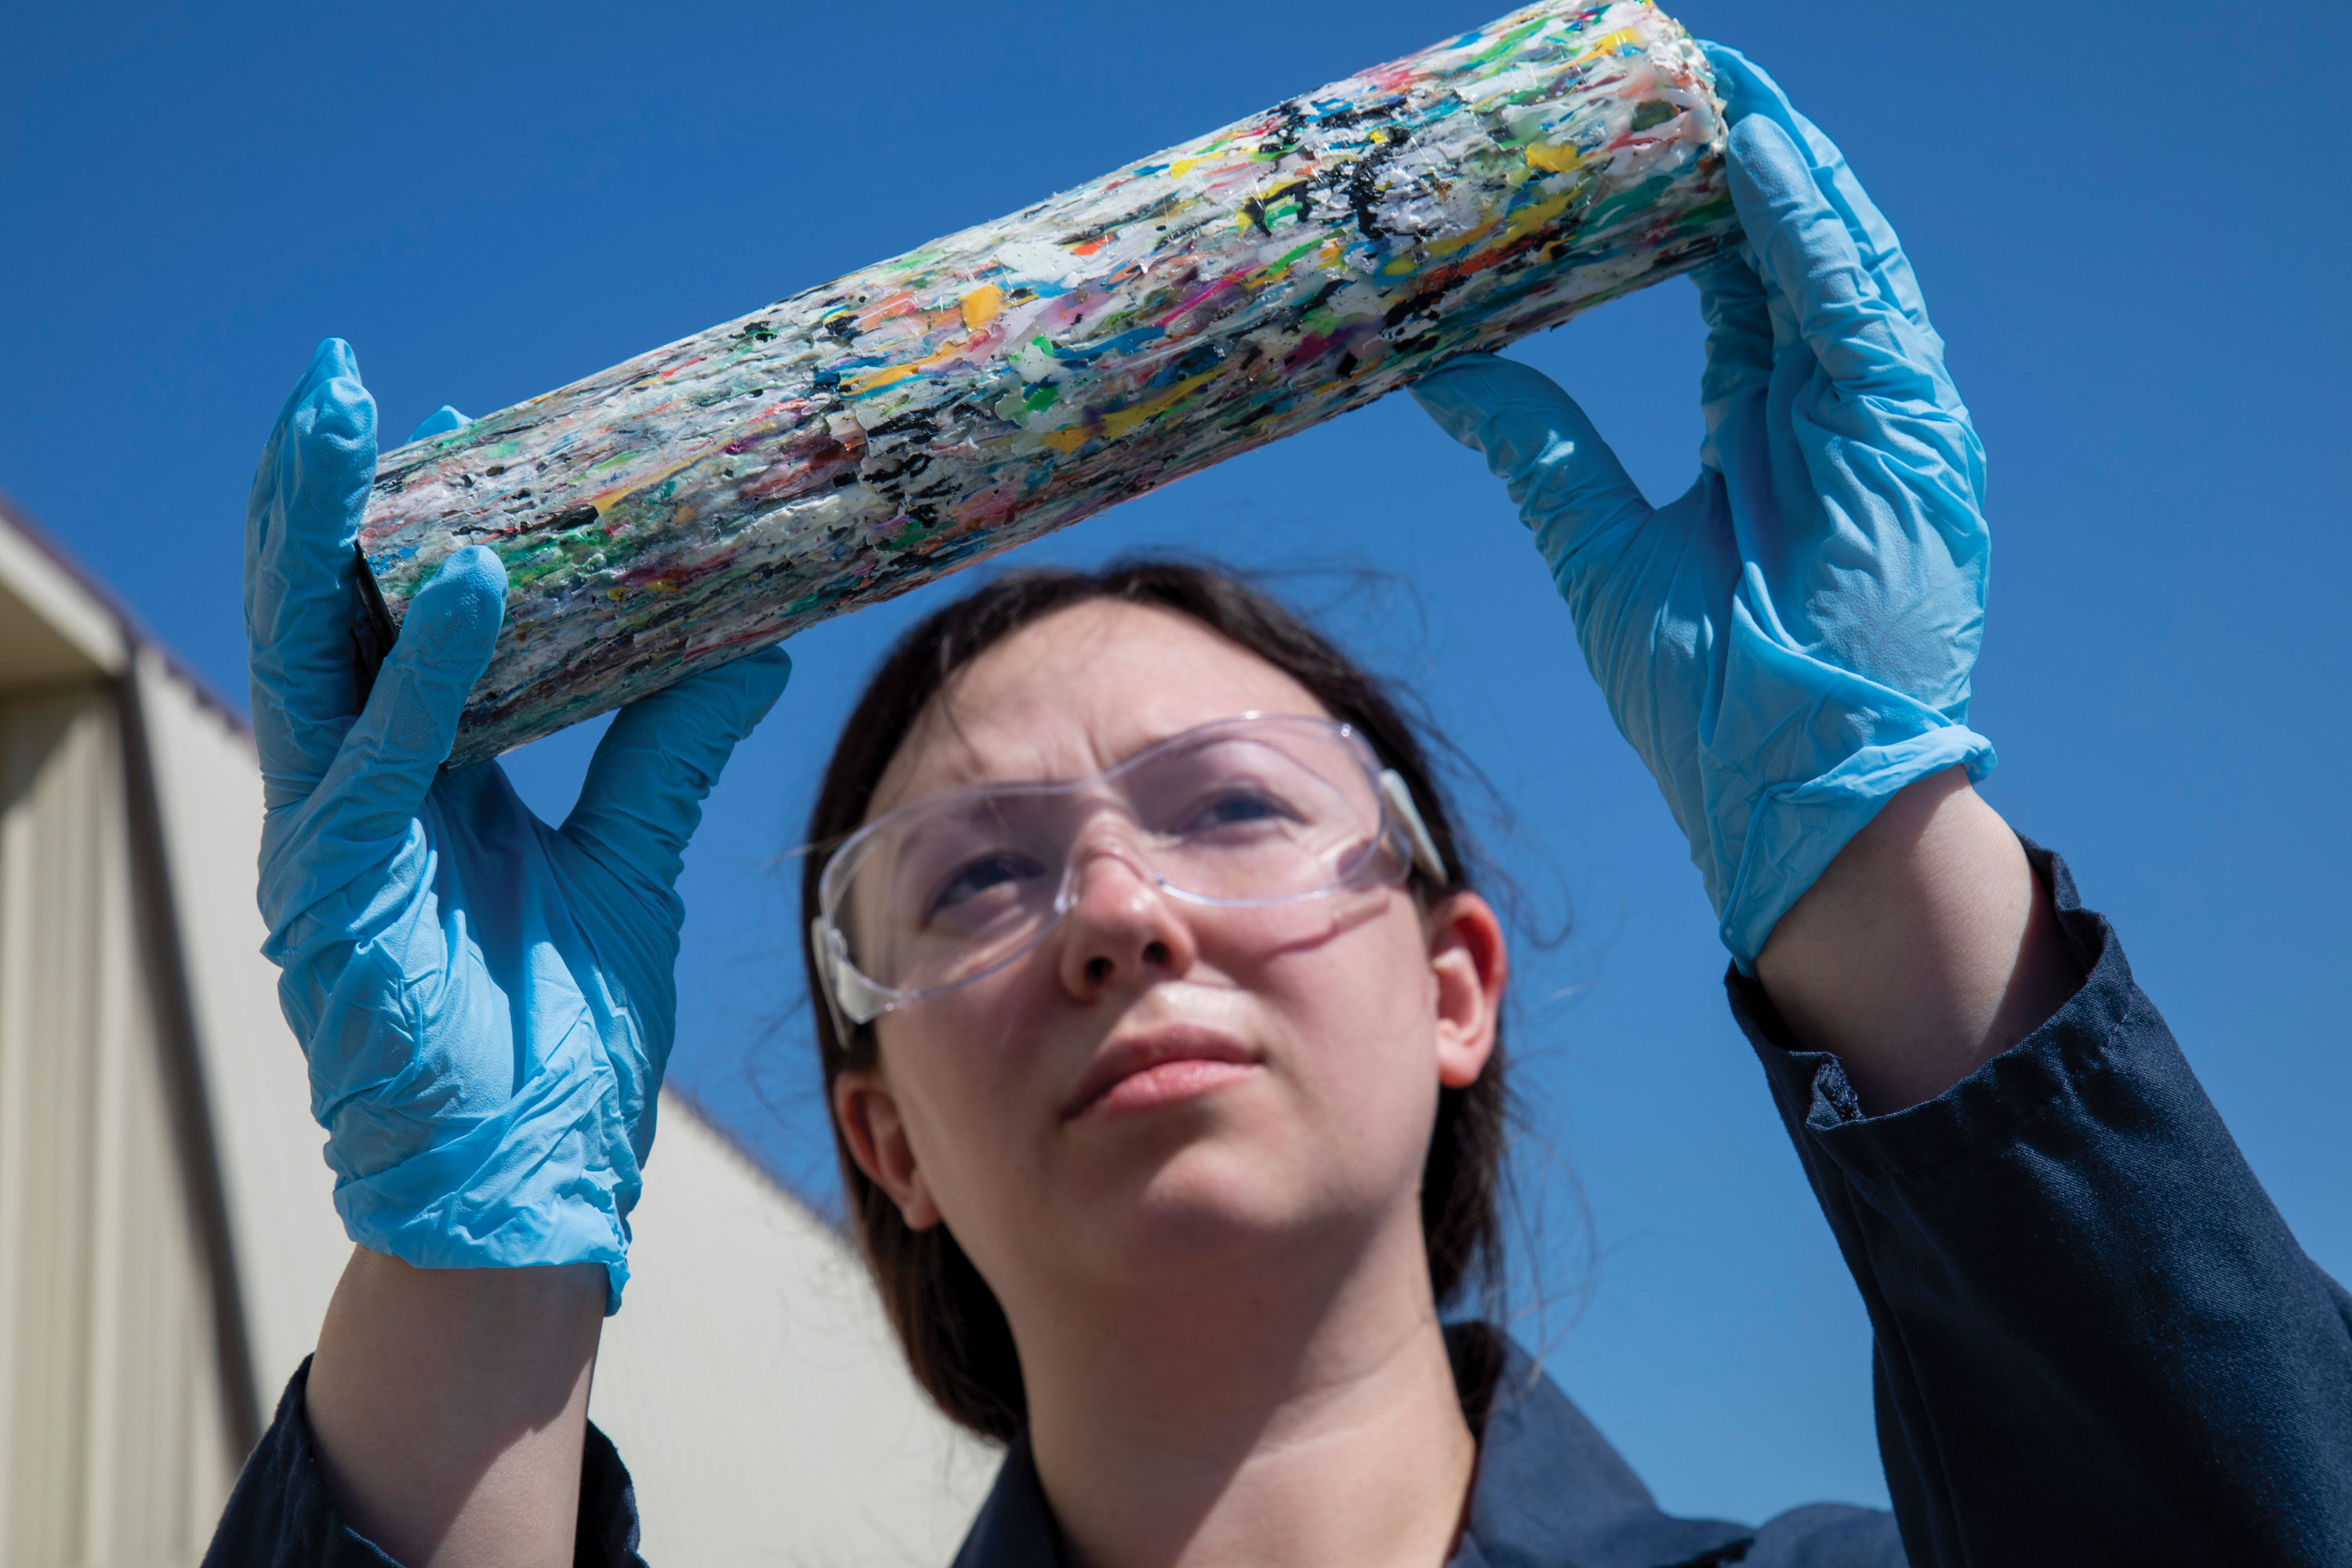 Engineer holding chemically recycled mixed plastics melted together into a cylinder